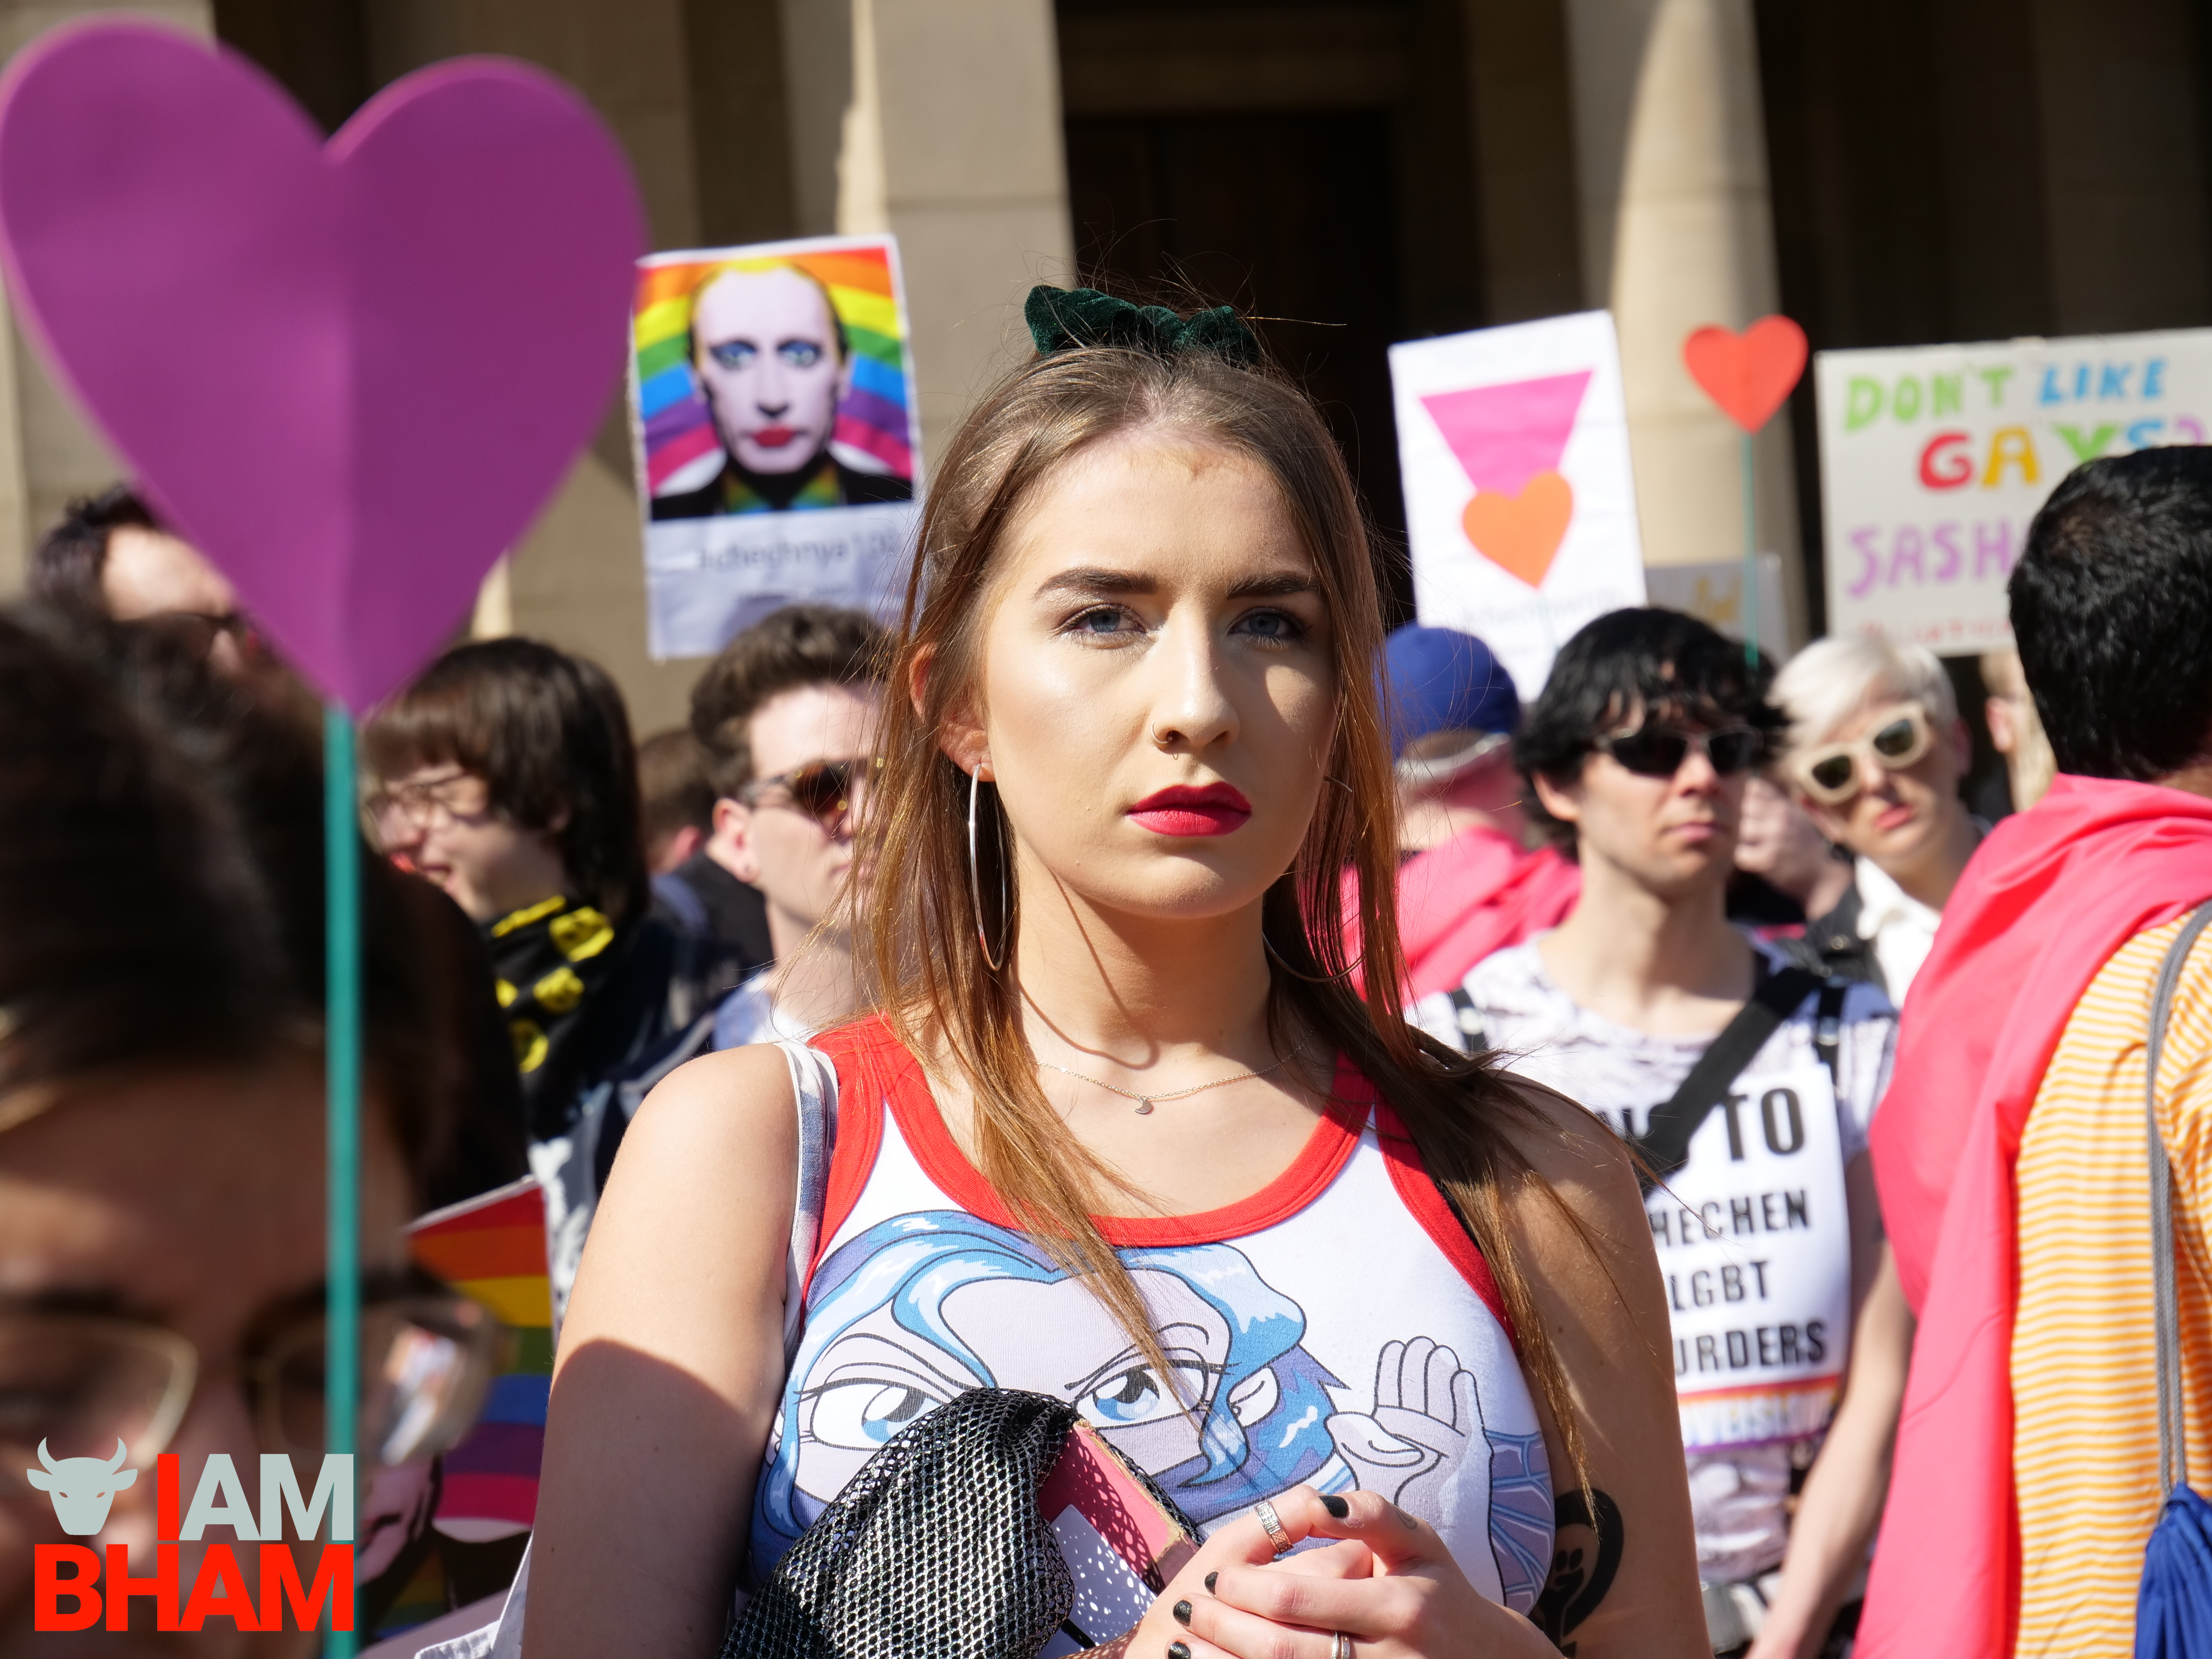 A protester attends a rally in Birmingham, supporting the LGBT victims of a homophobic abuse campaign being led by the leader of Chechnya (Photograph: Adam Yosef)